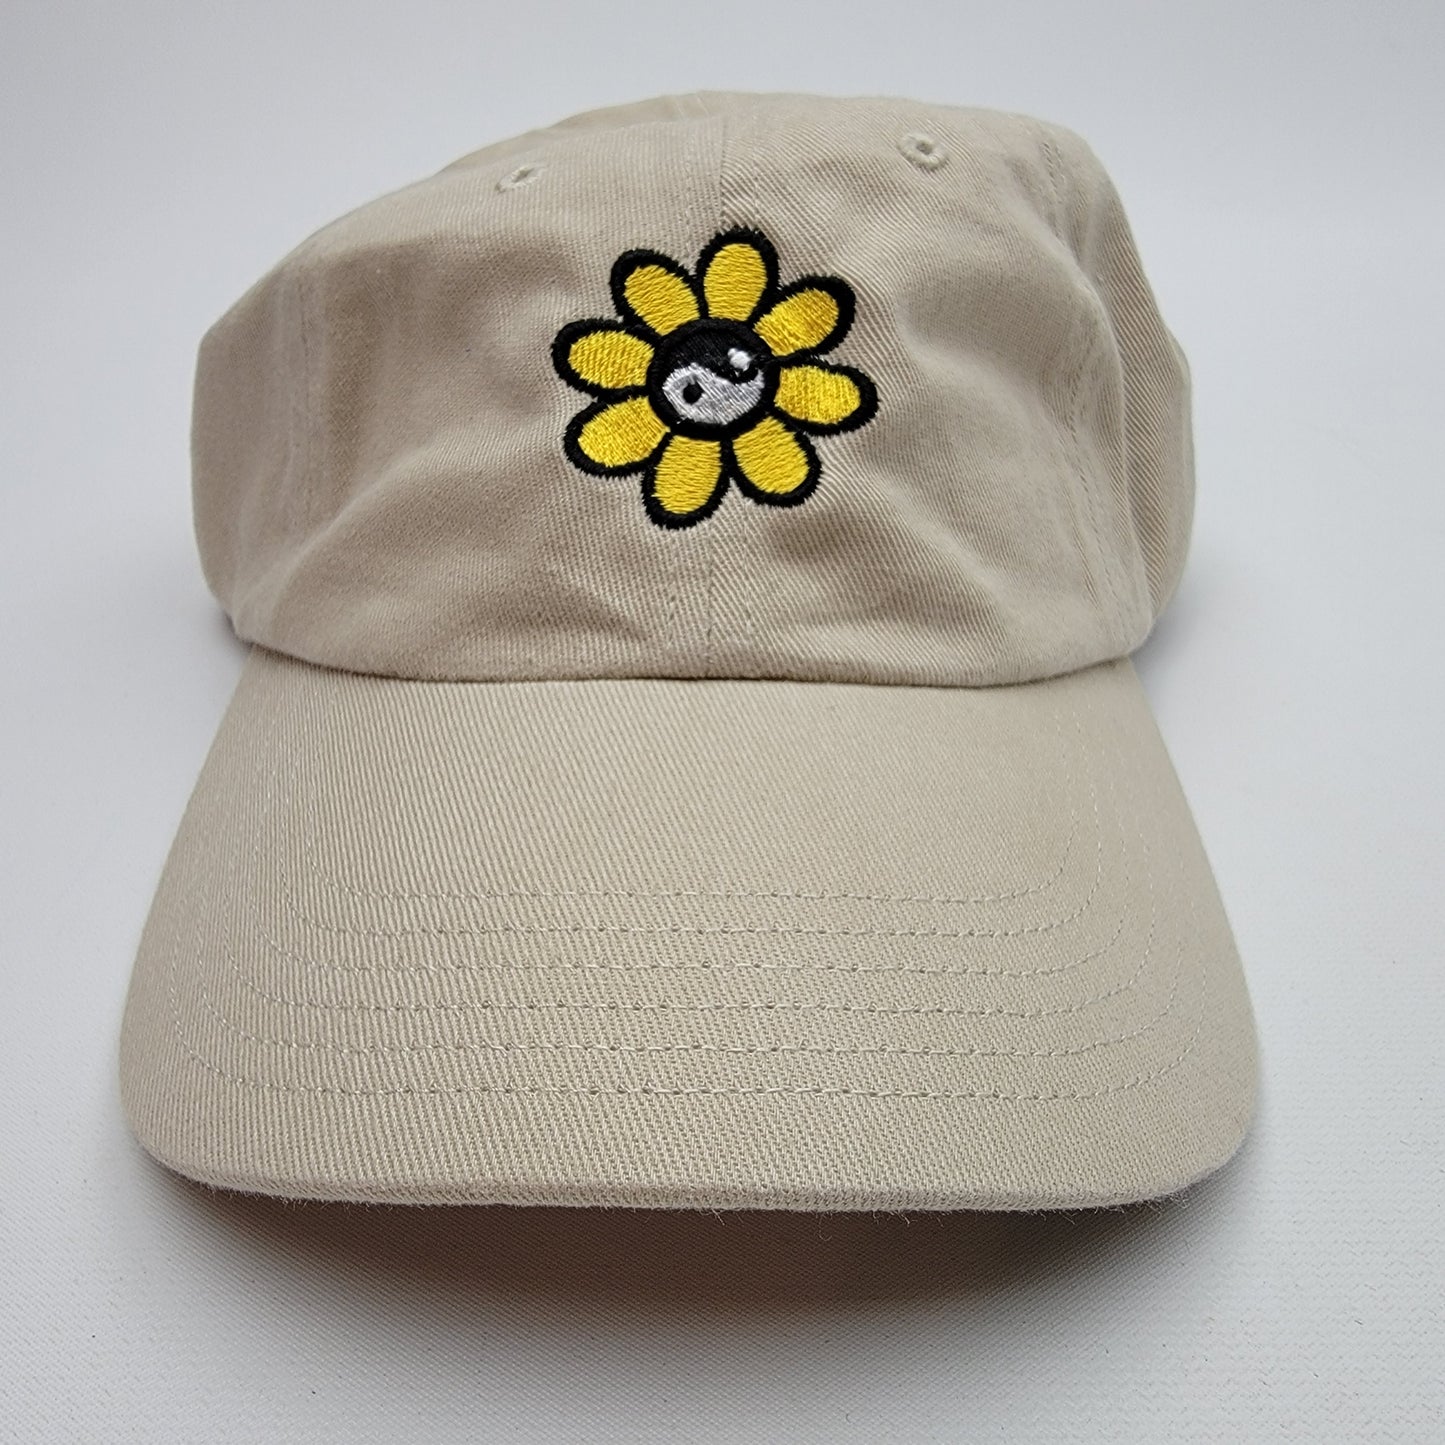 Yin & Yang Sunflower Richardson R55 Relaxed Cotton Women's Embroidered Buckle Strap Curved Bill Hat Cap Khaki